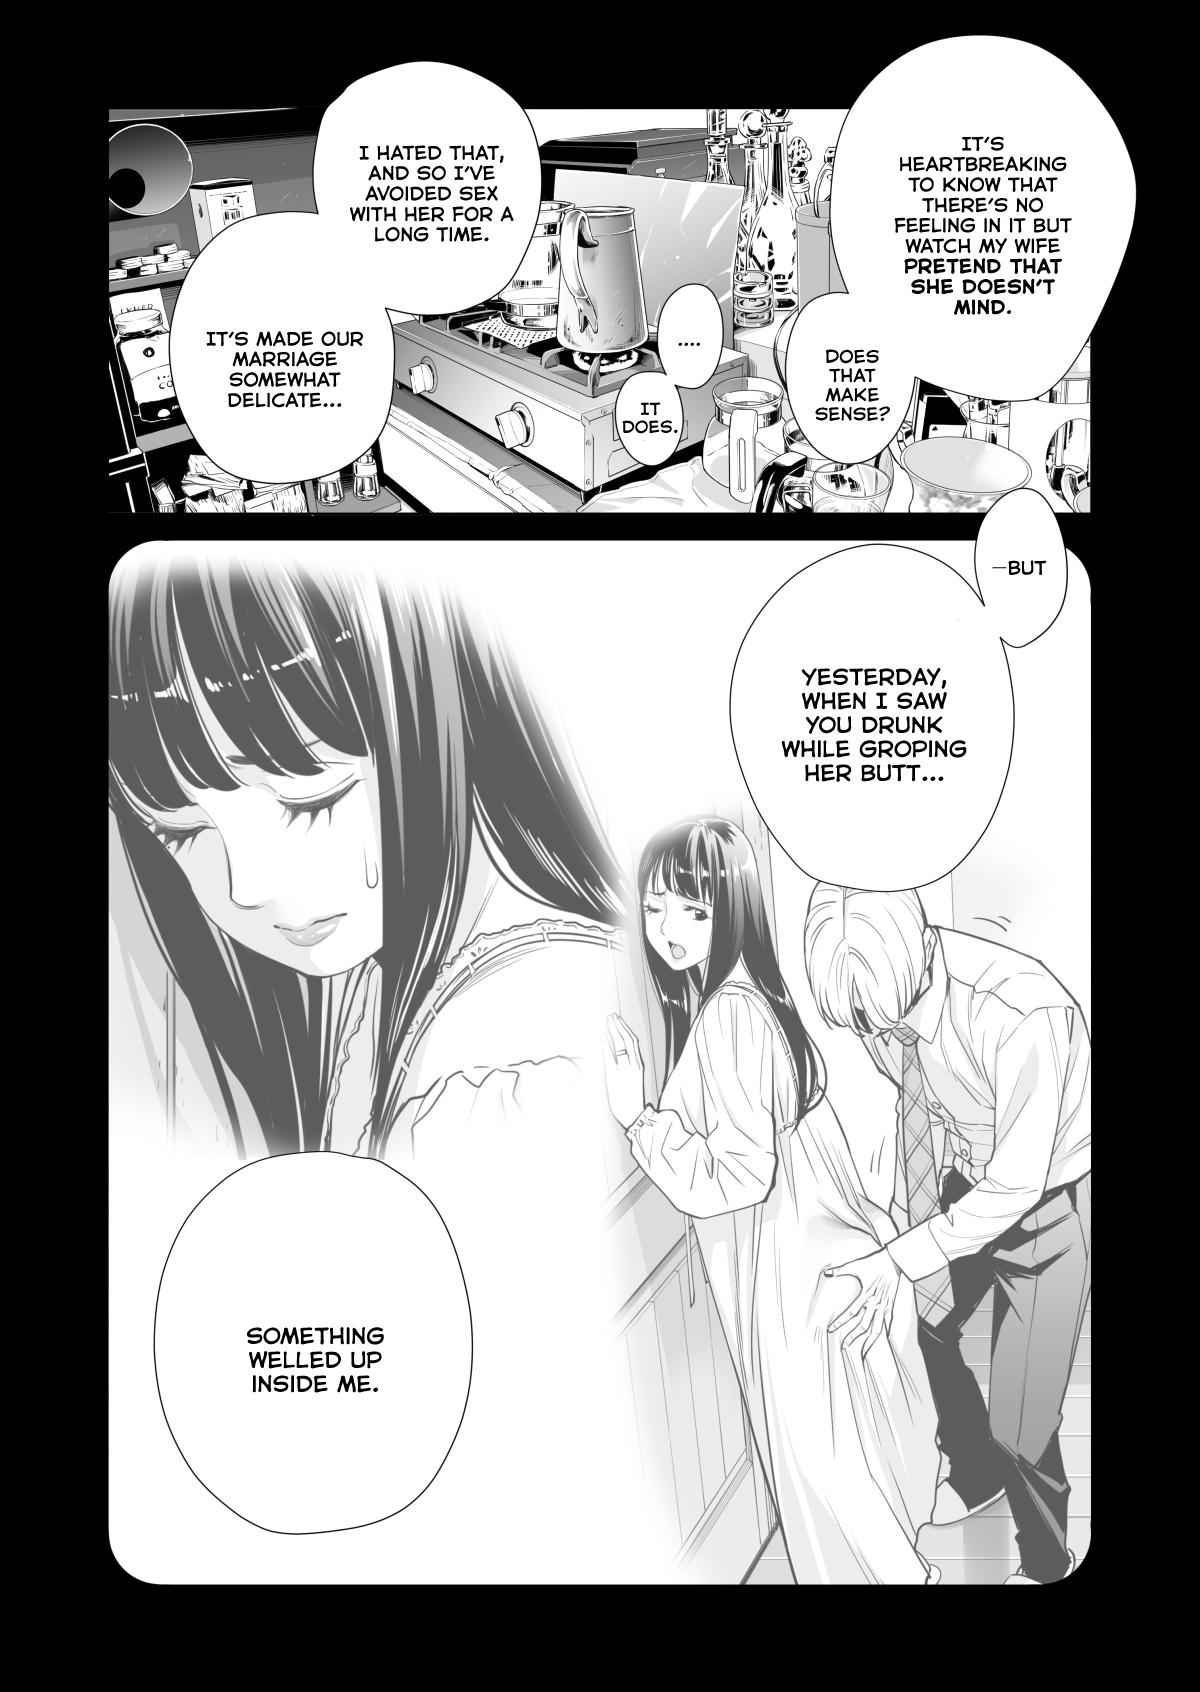 [HGT Lab (Tsusauto)] Tsukiyo no Midare Zake (Kouhen) Moonlit Intoxication ~ A Housewife Stolen by a Coworker Besides her Blackout Drunk Husband ~ Chapter 2 [English] 46